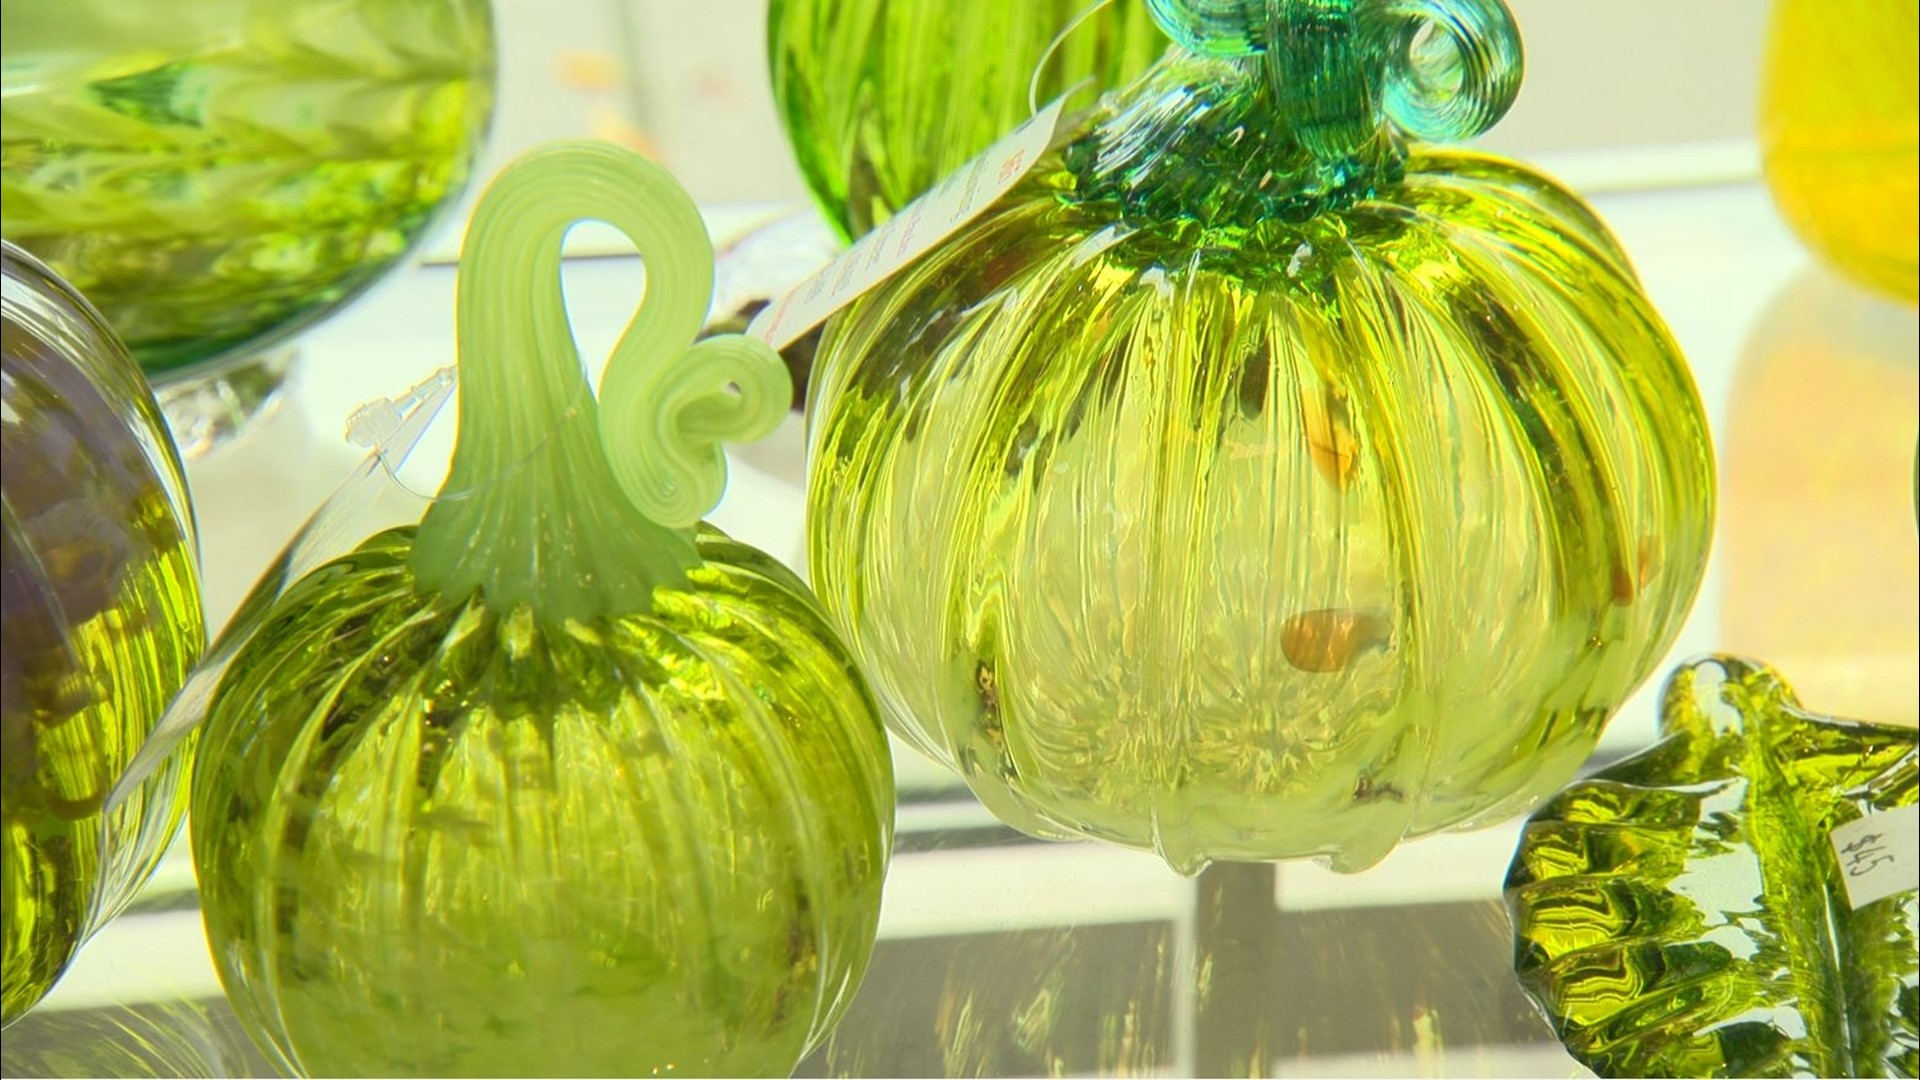 This Tacoma studio makes 6-thousand glass pumpkins year-round to prepare for the flood of sales that happen in the fall. #k5evening